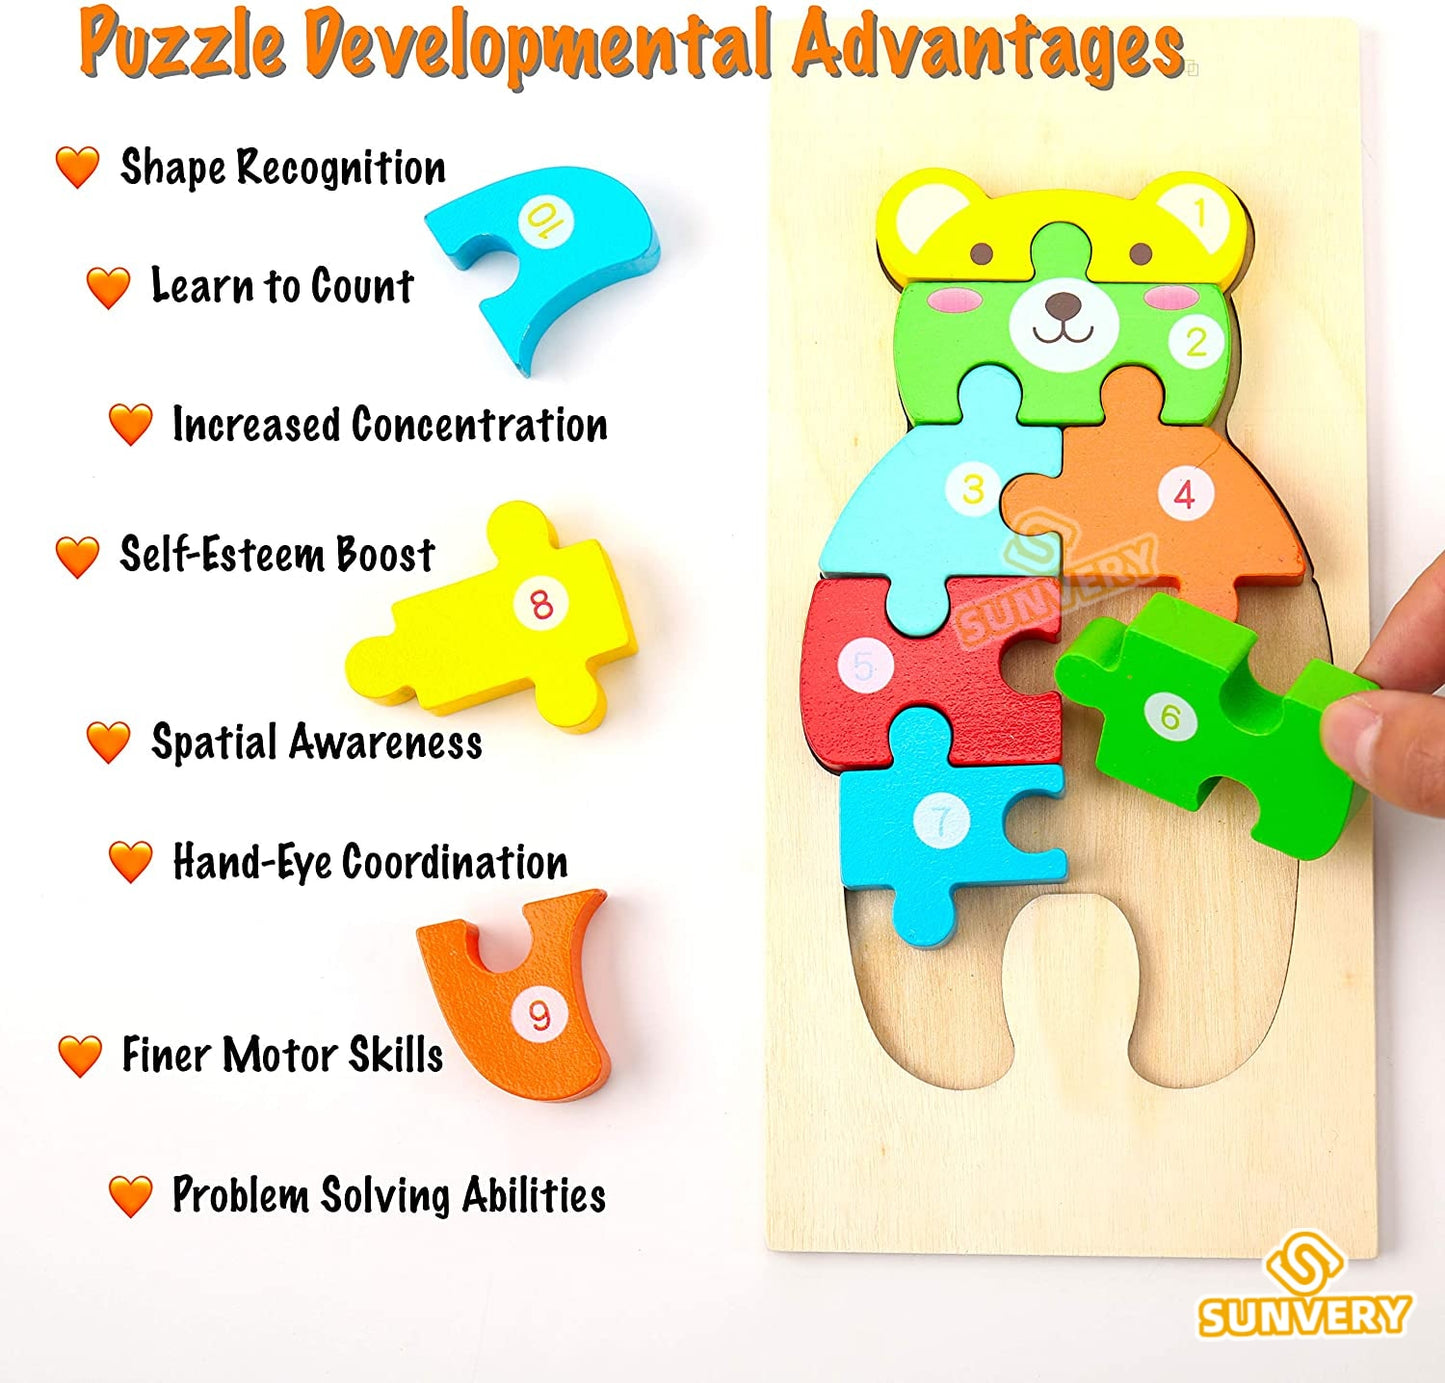 Montessori Wooden Toddler Puzzles, Many Styles